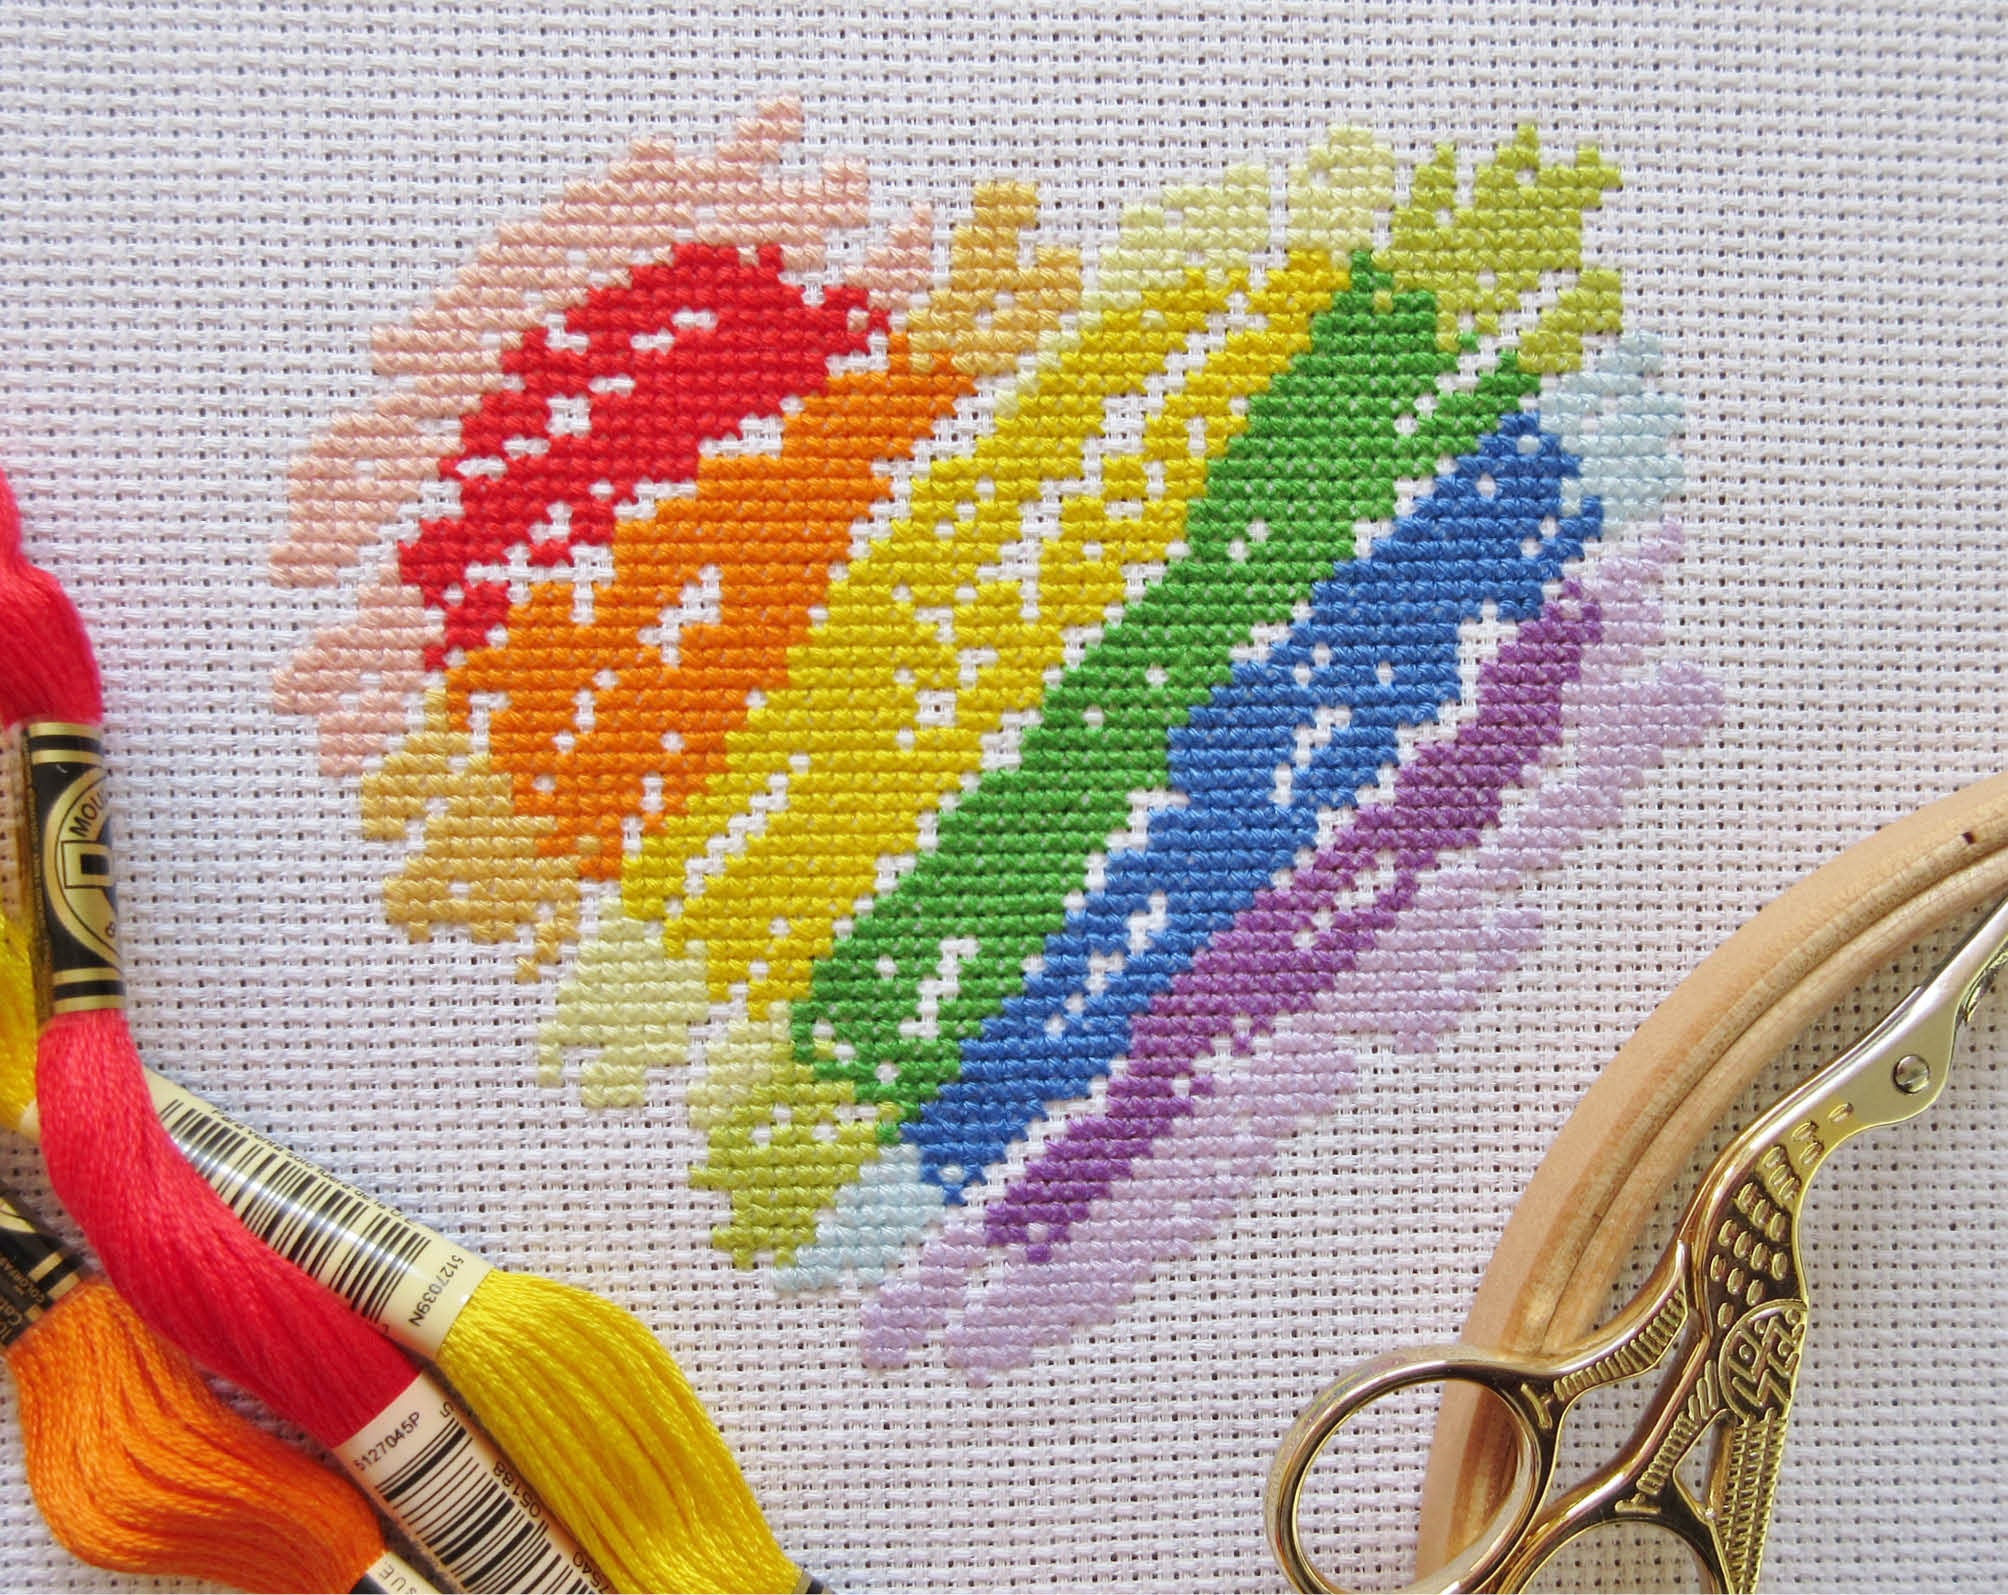 Brushstrokes Rainbow Heart cross stitch pattern - stitched piece with props